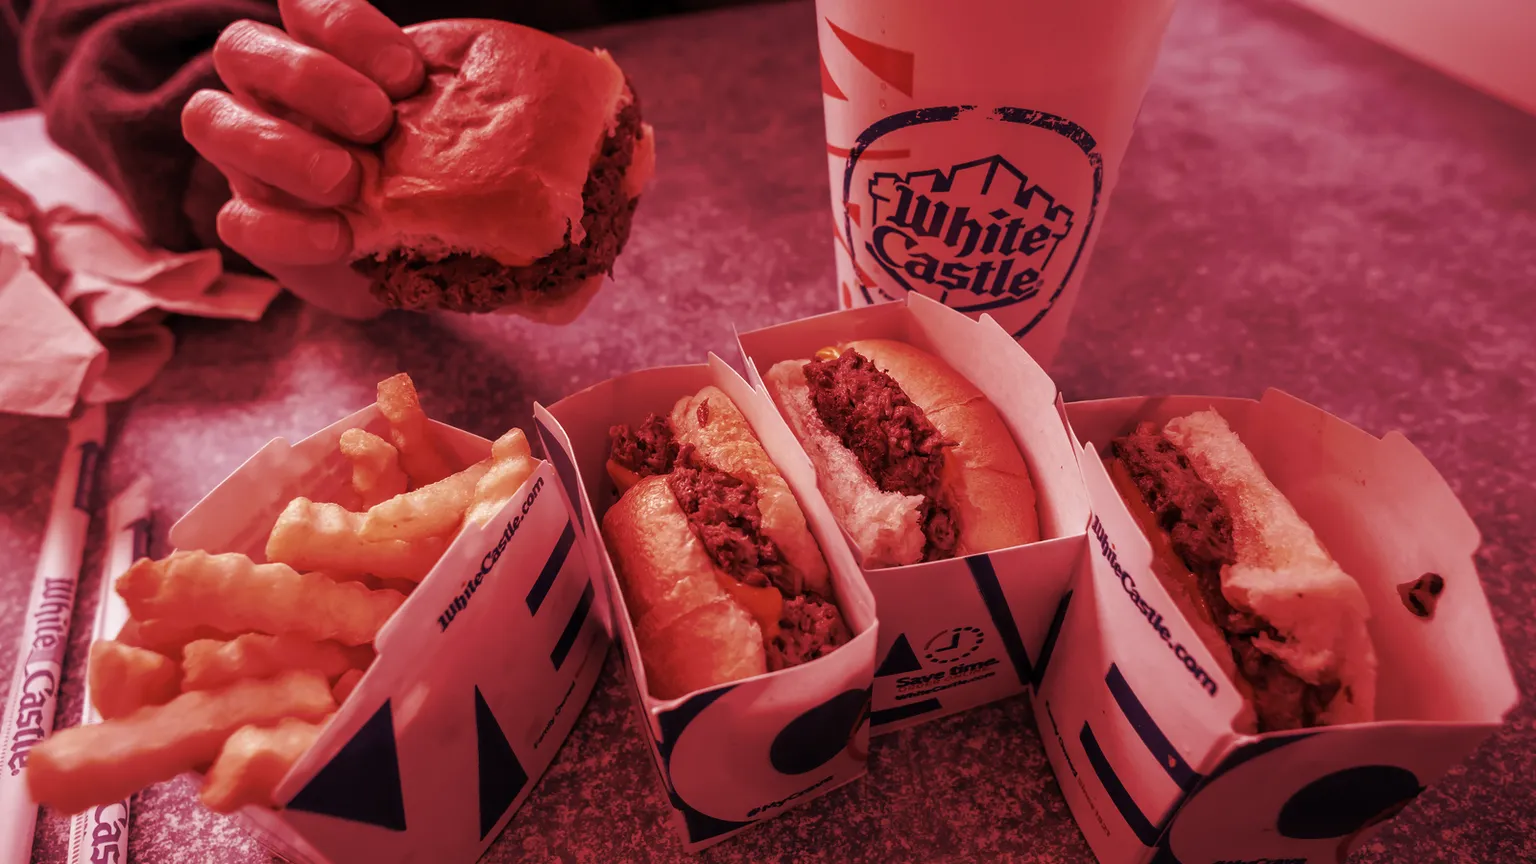 White Castle is the latest brand to join crypto. Image: Shutterstock